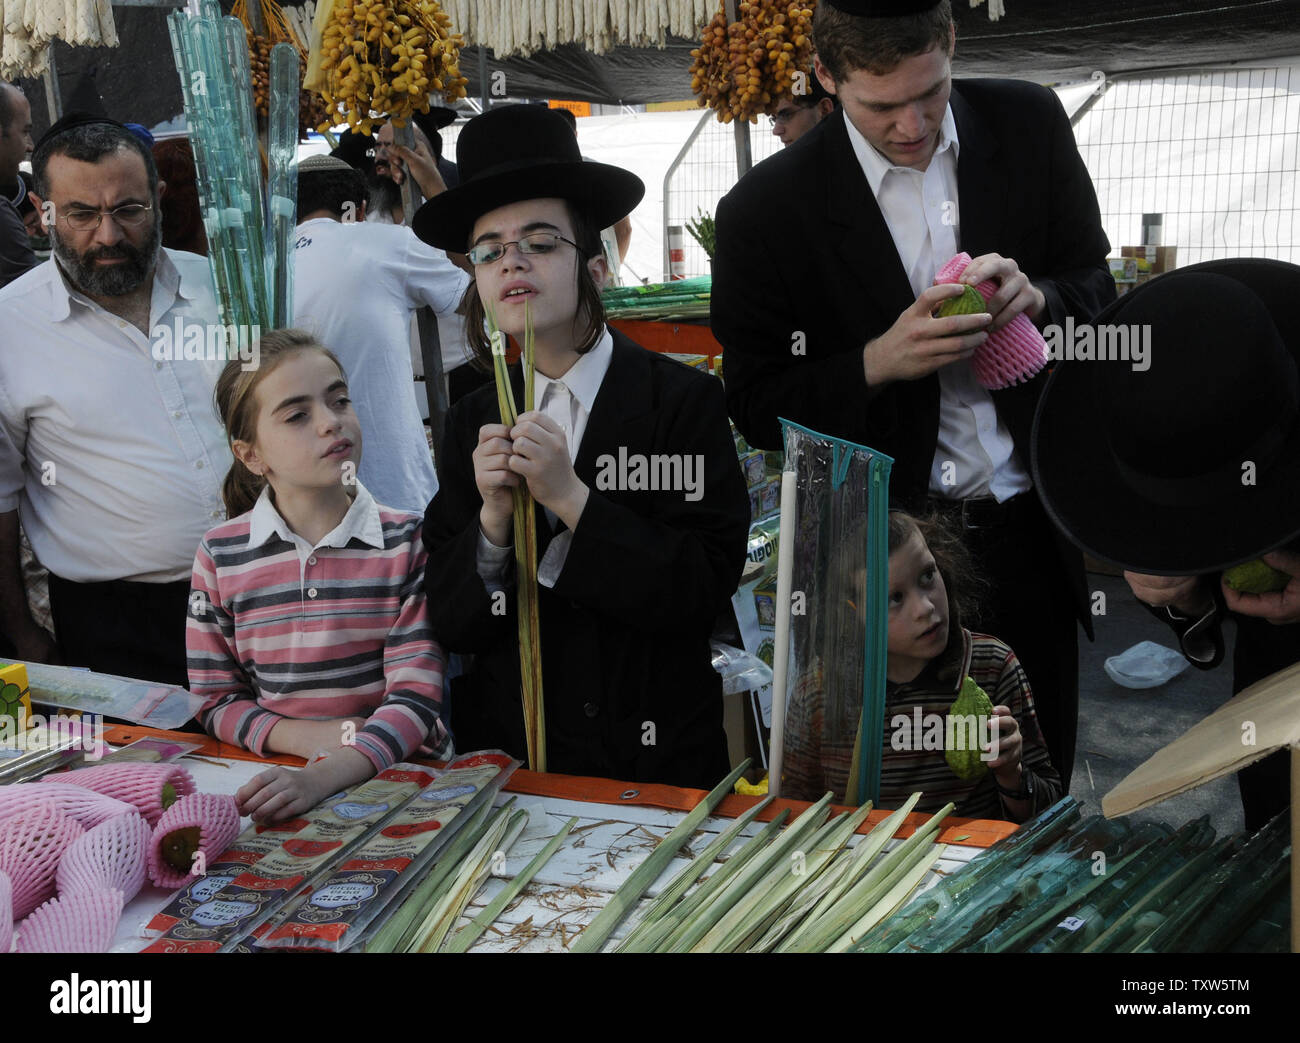 Ultra-Orthodox Jews examine a lulav, the branch of a palm tree, and esrog, two of the four species used during the Festival of Sukkot at a market in  Jerusalem, October 10, 2008.  Observant Jews build a sukkah, a temporary dwelling, during Sukkot to remember the 40 years that the Israelites wandered in the wilderness after leaving Egypt. (UPI Photo/Debbie Hill) Stock Photo